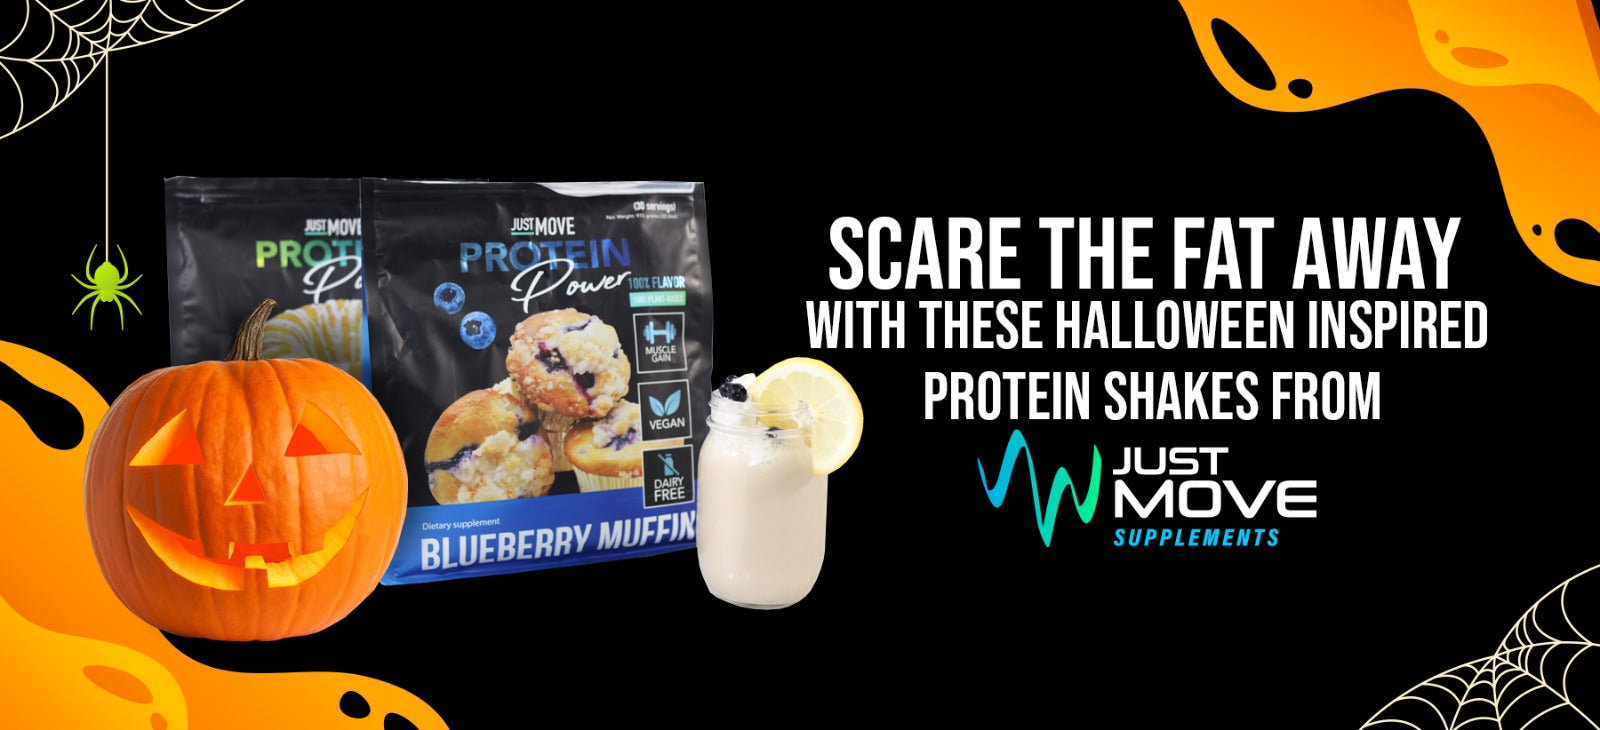 Spooktacular Protein Shakes: 10 Halloween-Inspired Recipes with Just Move Supplements